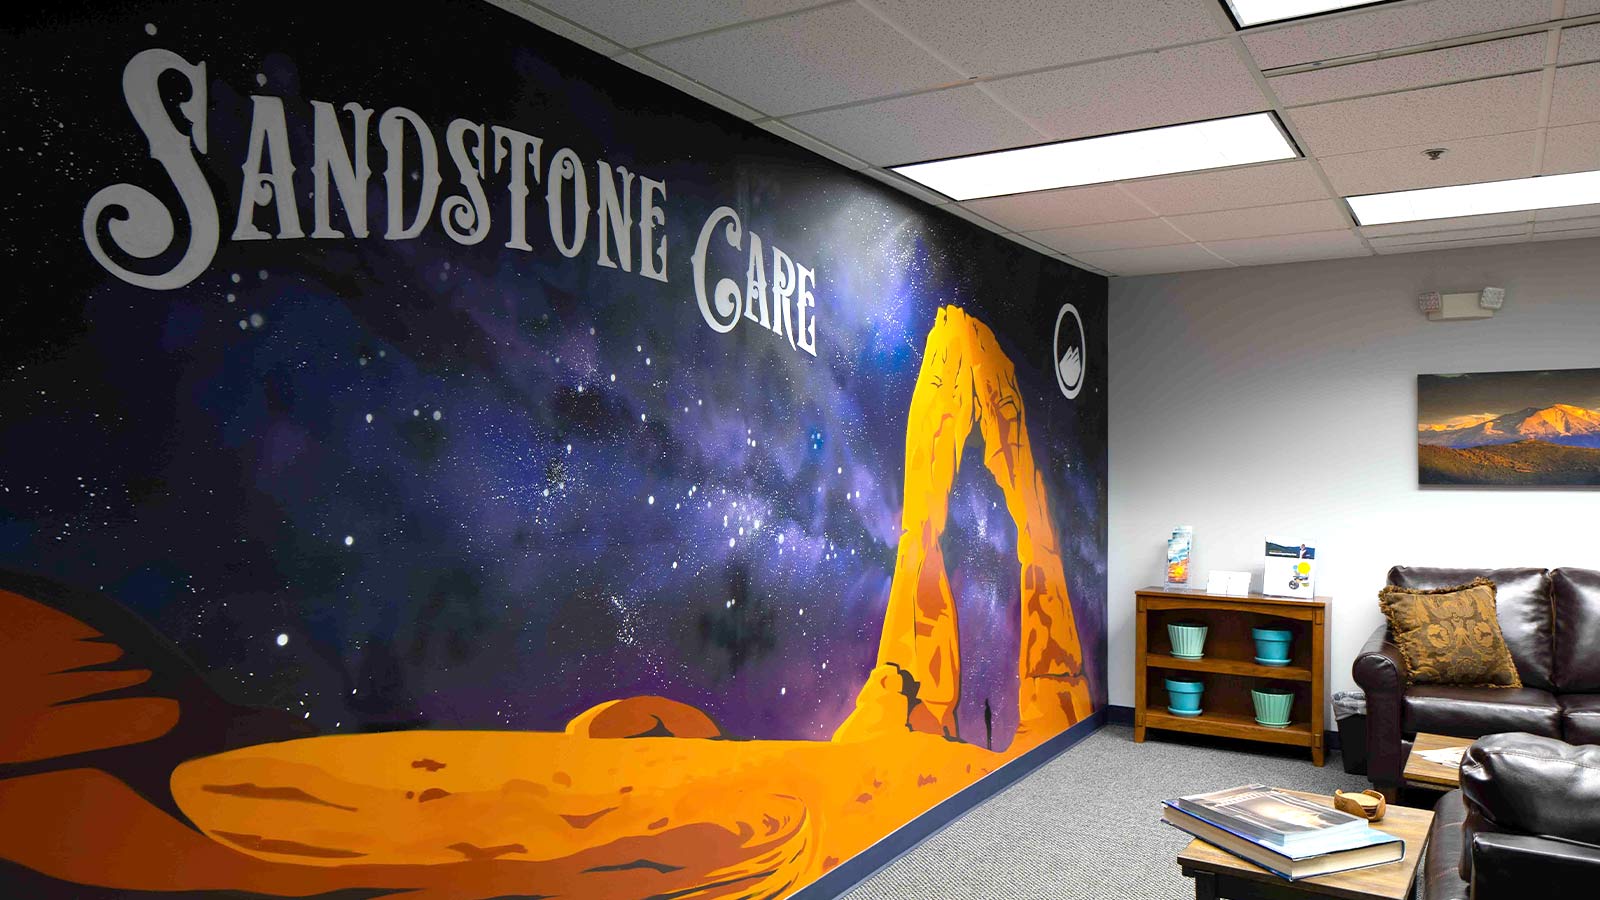 A large mural of a starry sky and sandstone arch with the words "Sandstone Care" on an interior wall of a waiting area.